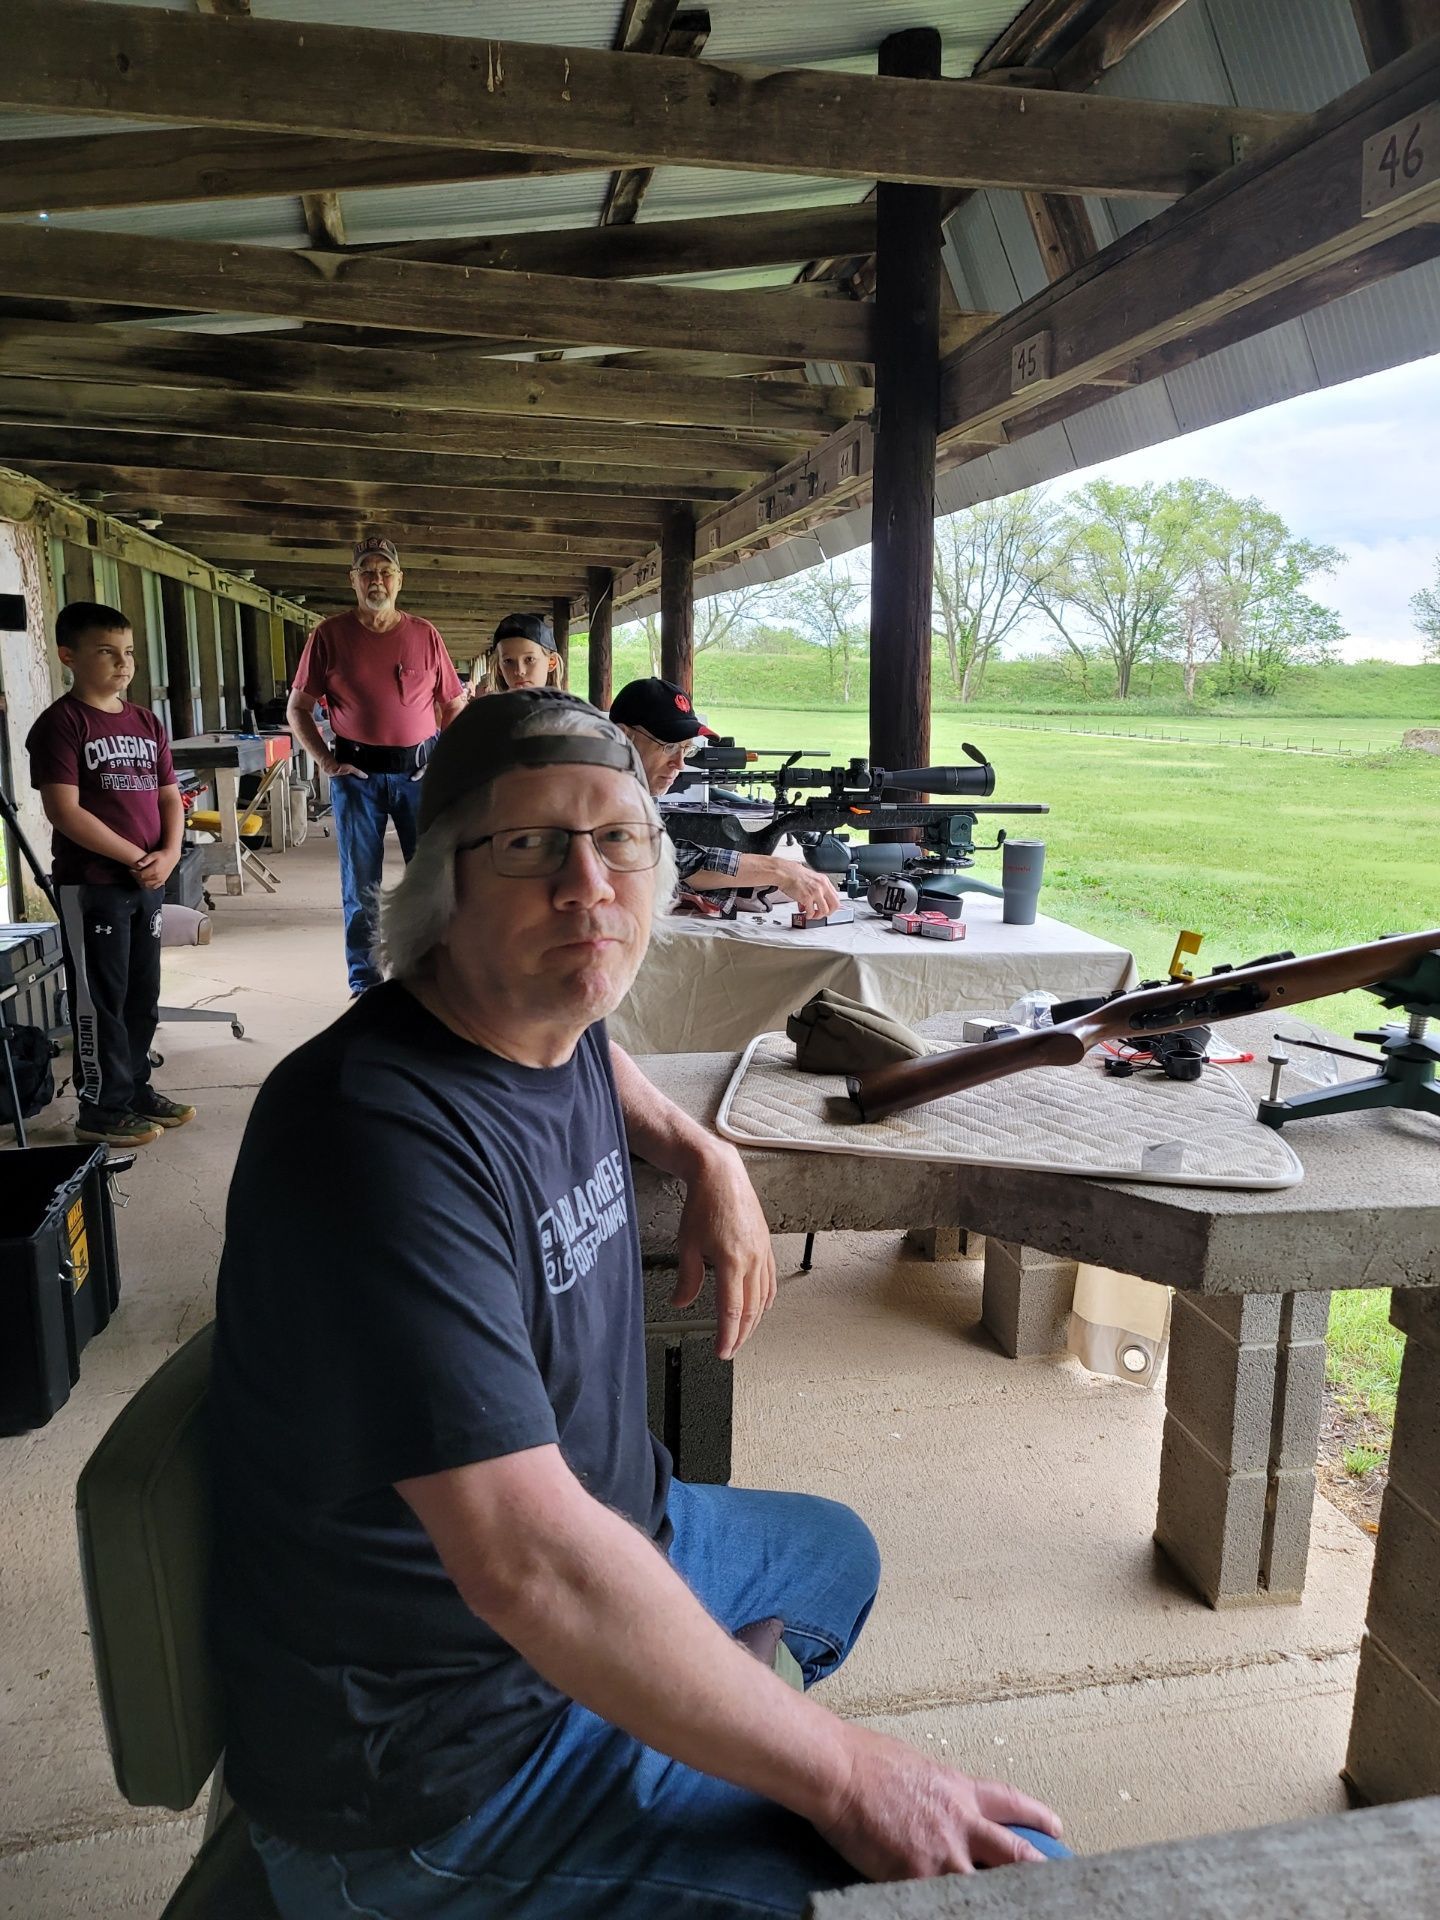 mean in black shirt and glasses sitting at gun range rifle table